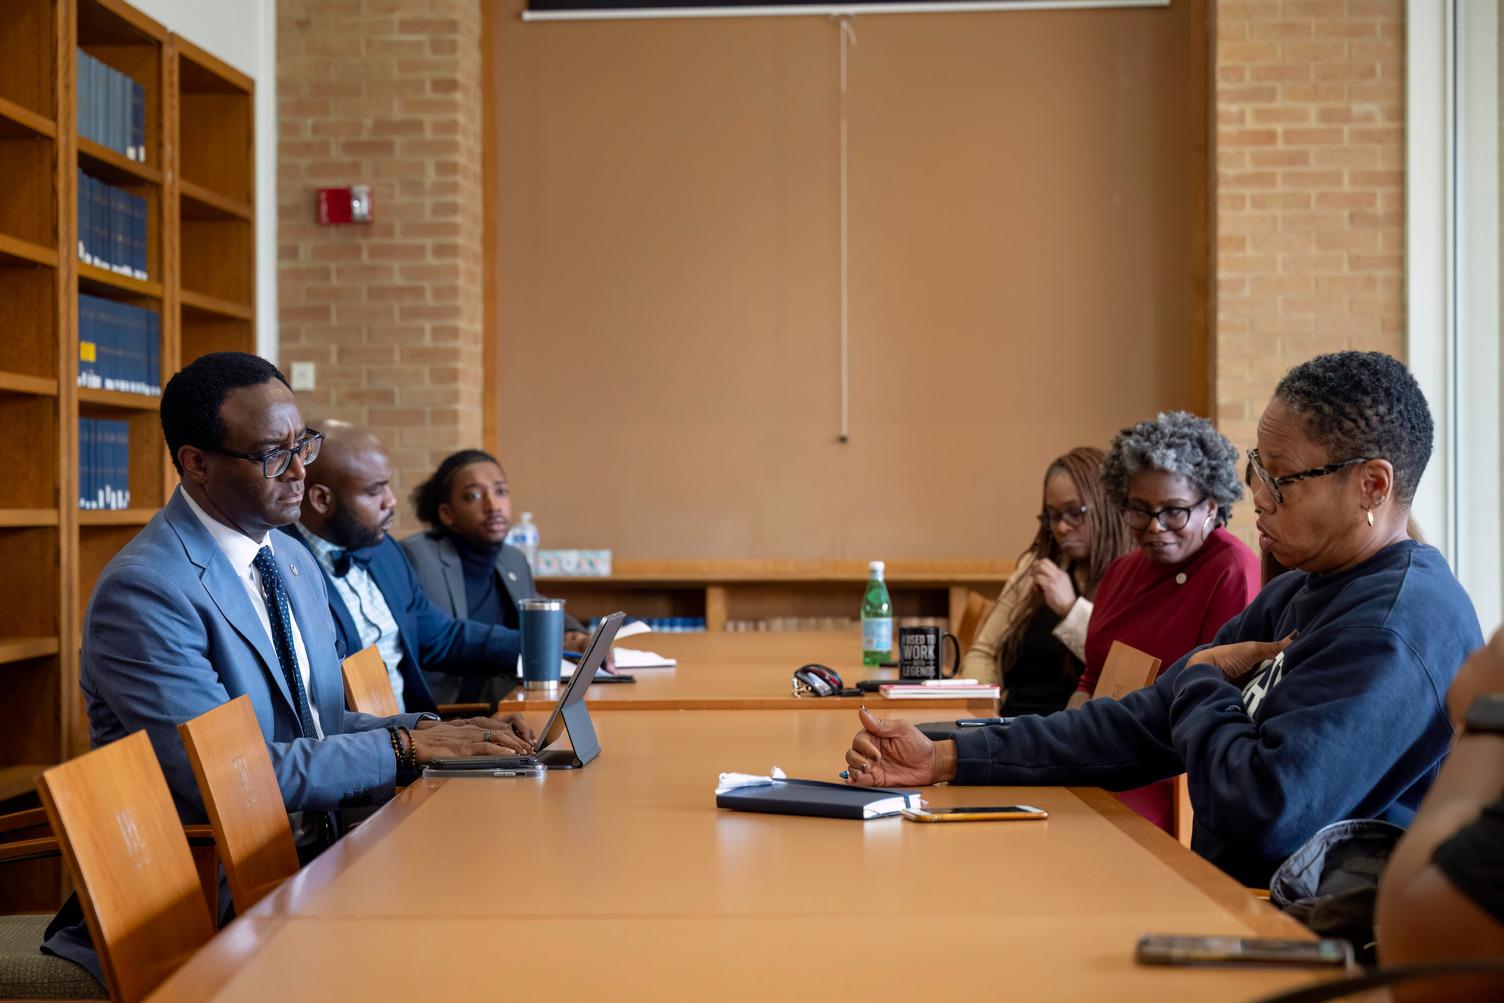 President Vinson meets with members of the Howard community during his listening tour. Photo by Justin D. Knight